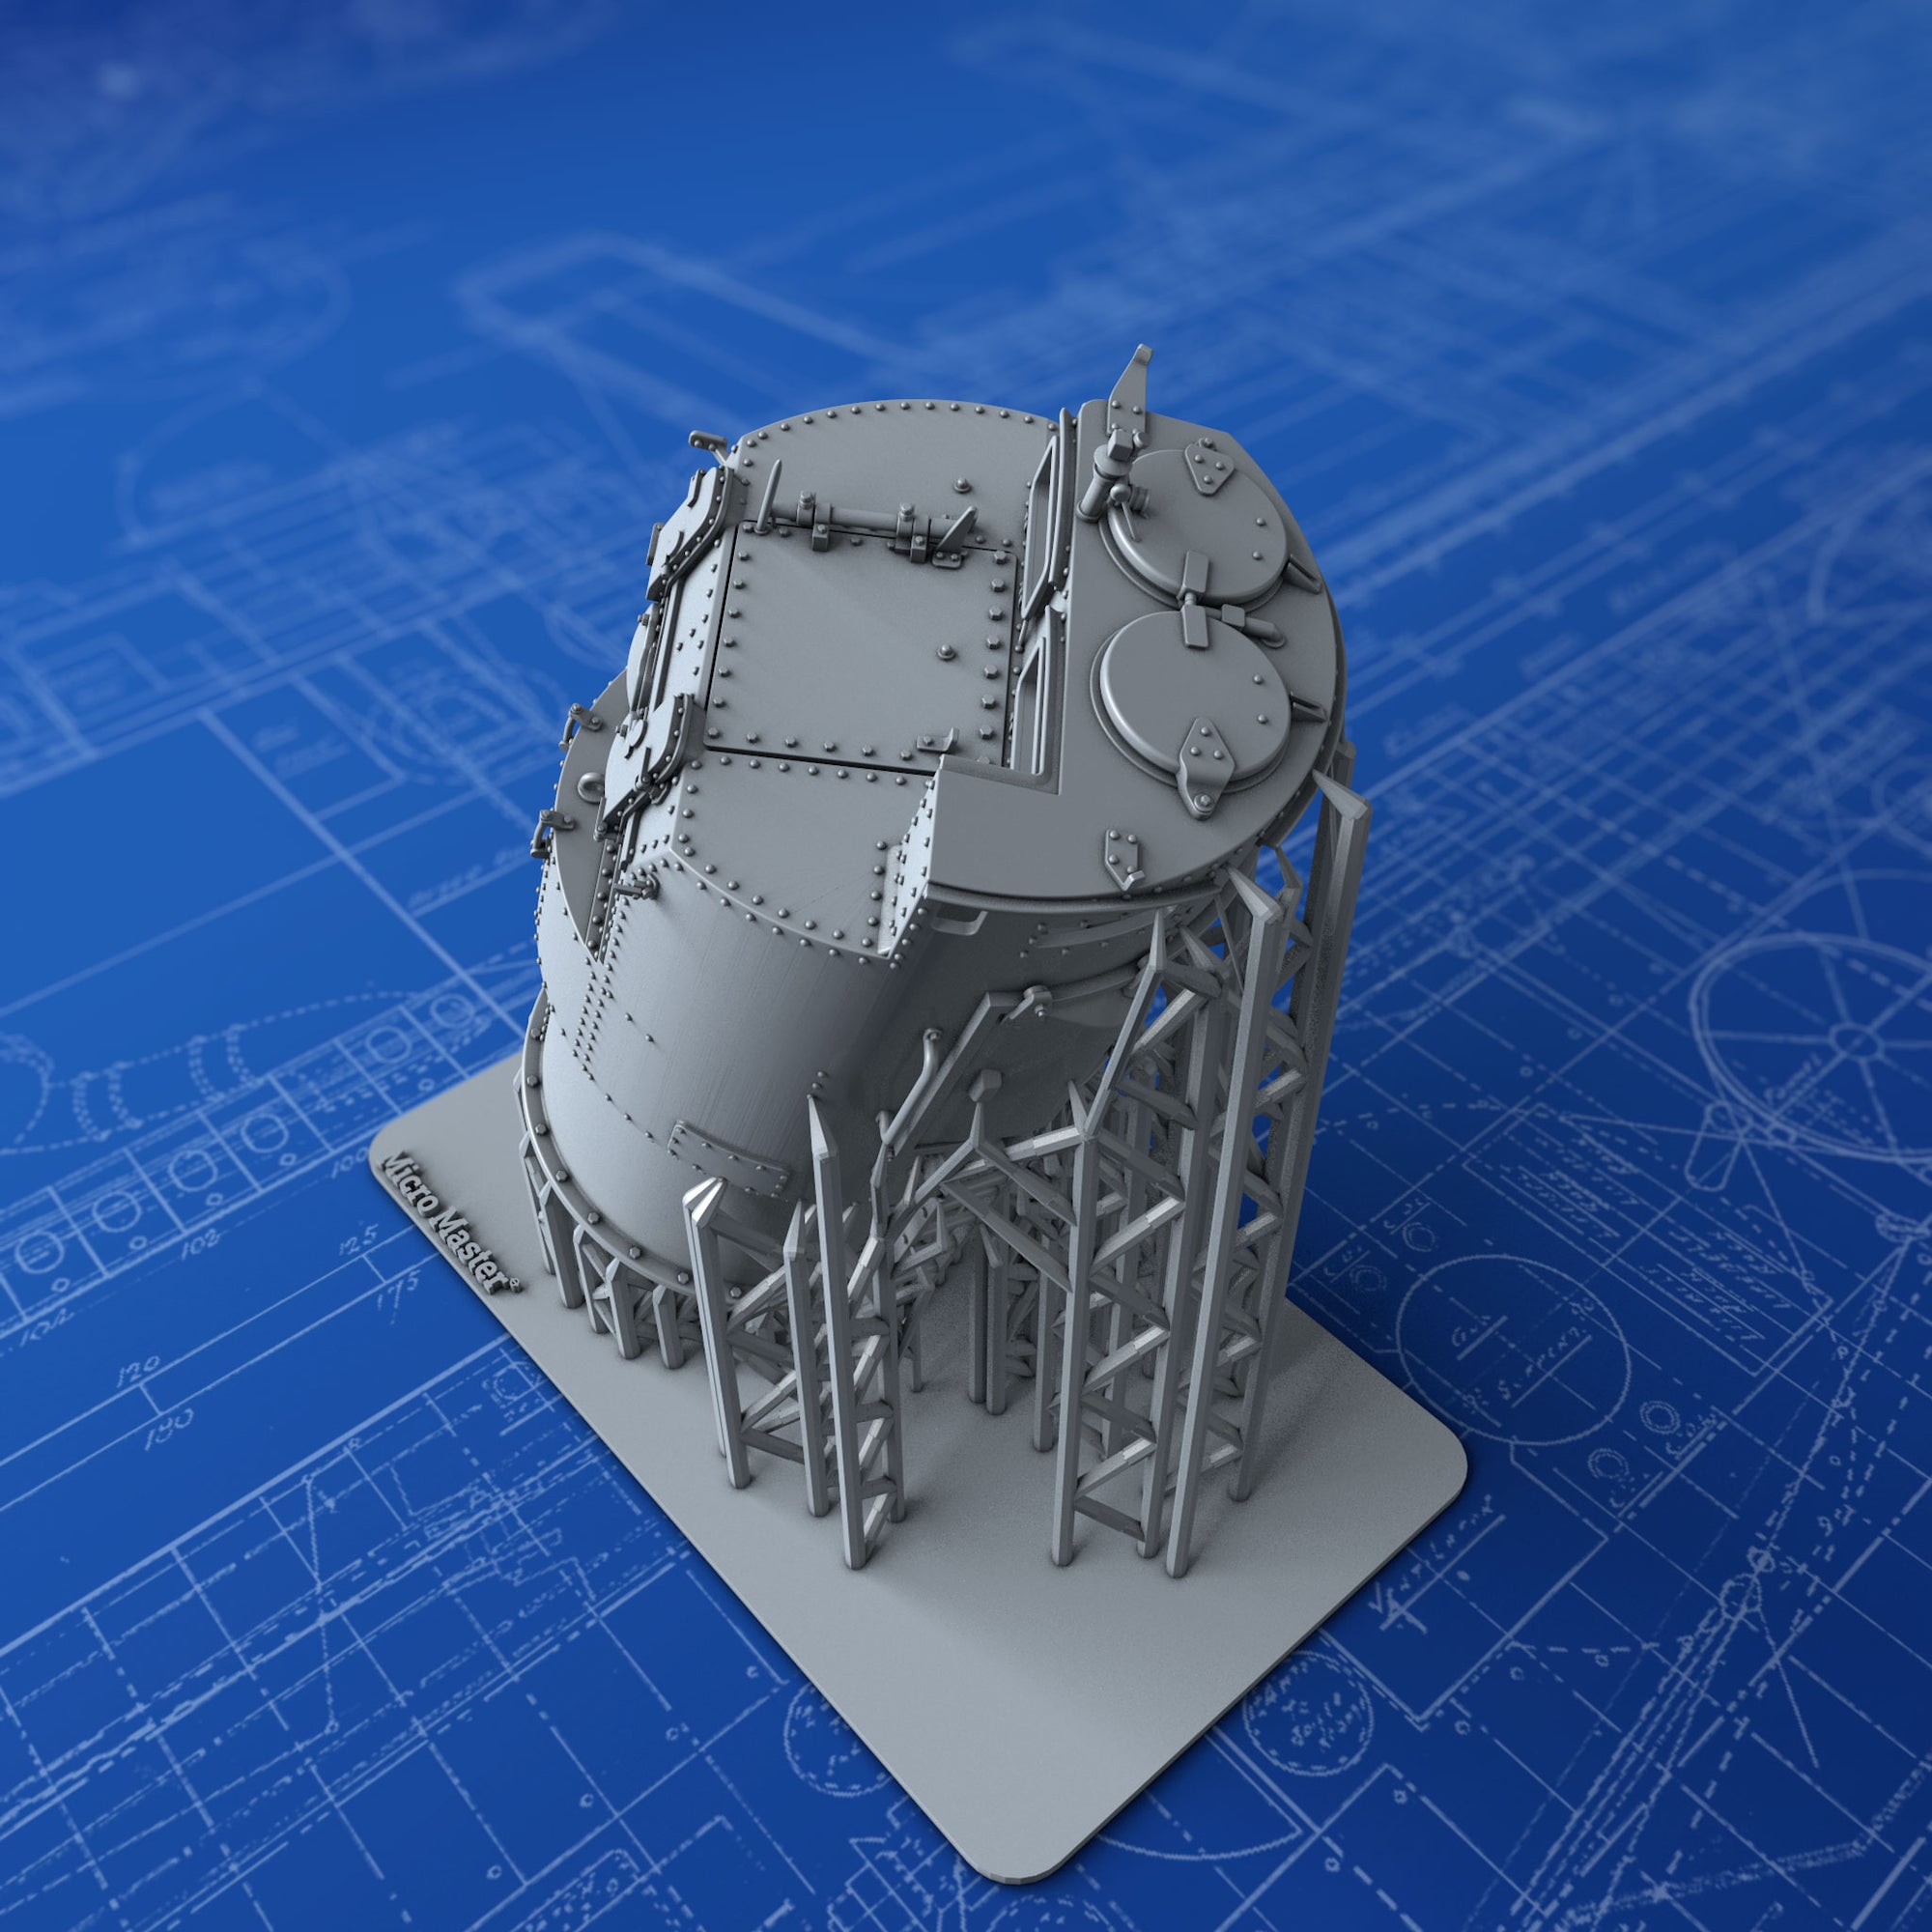 TF-DS-CREW-QUARTERS - Download Free 3D model by Binkley